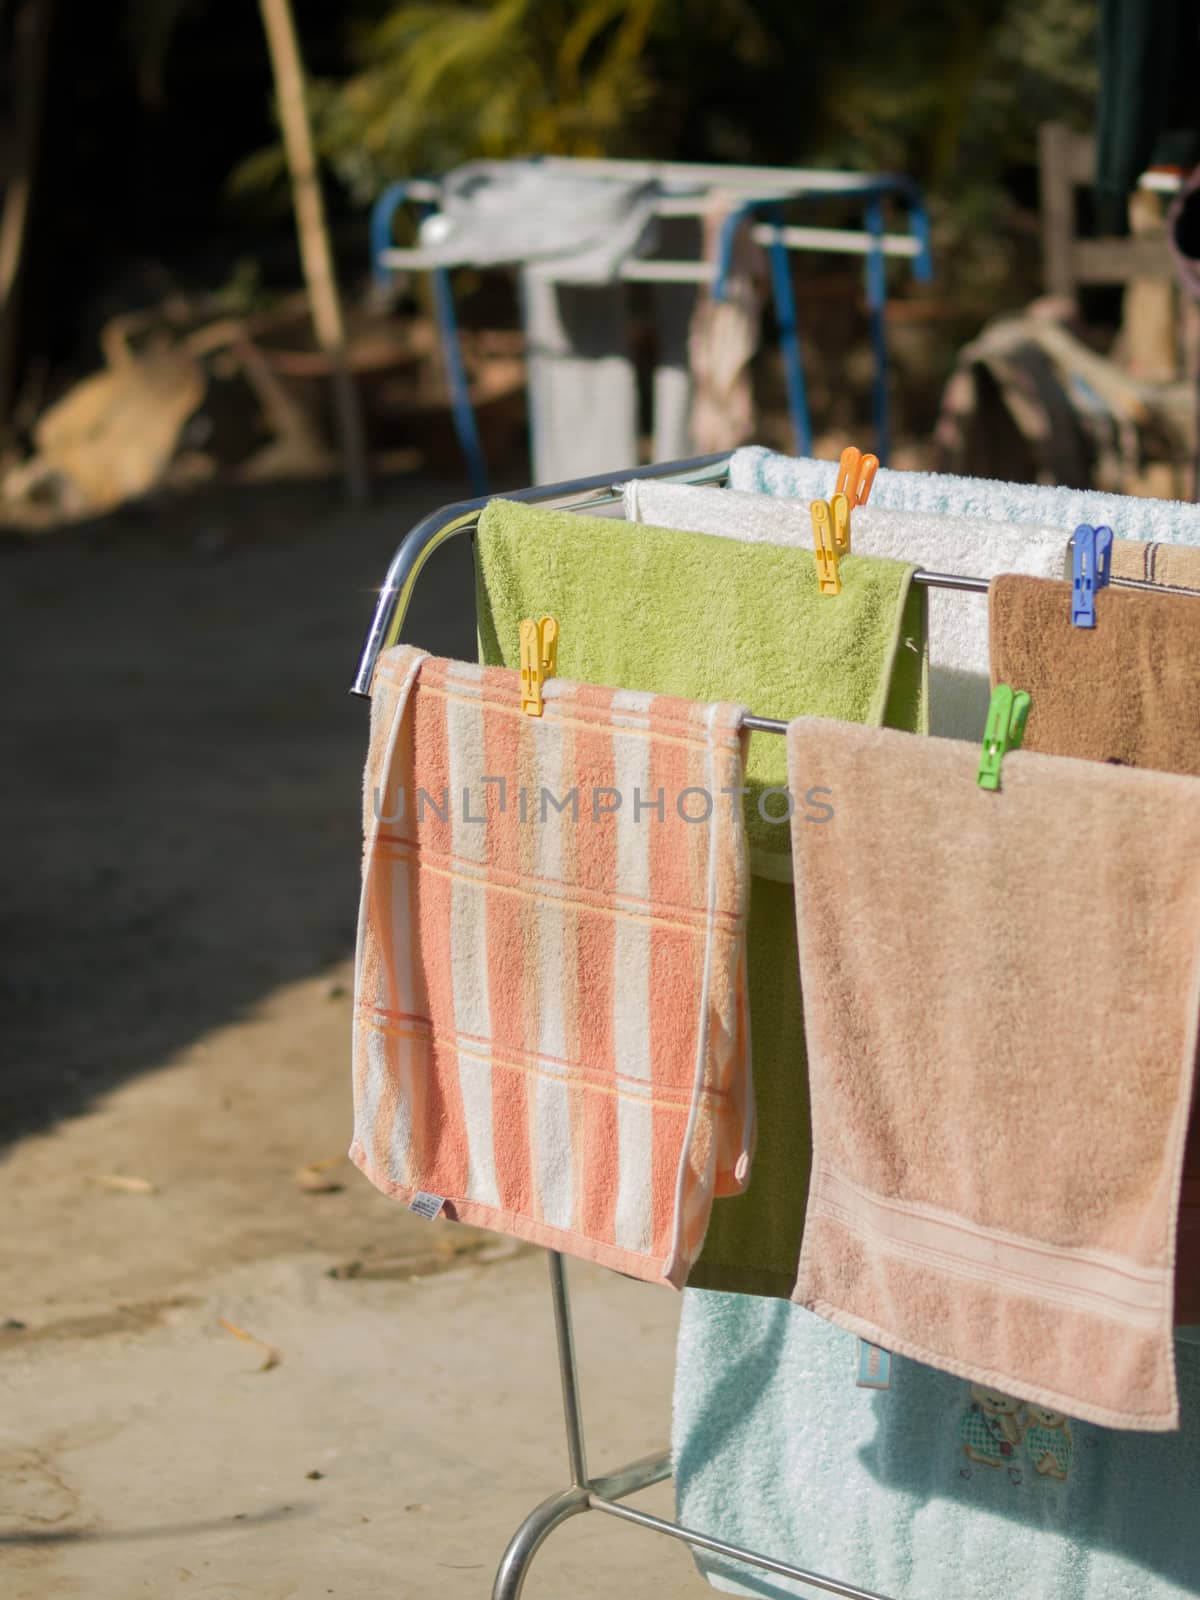 COLOR PHOTO OF GROUP OF TOWELS UNDER SUNLIGHT